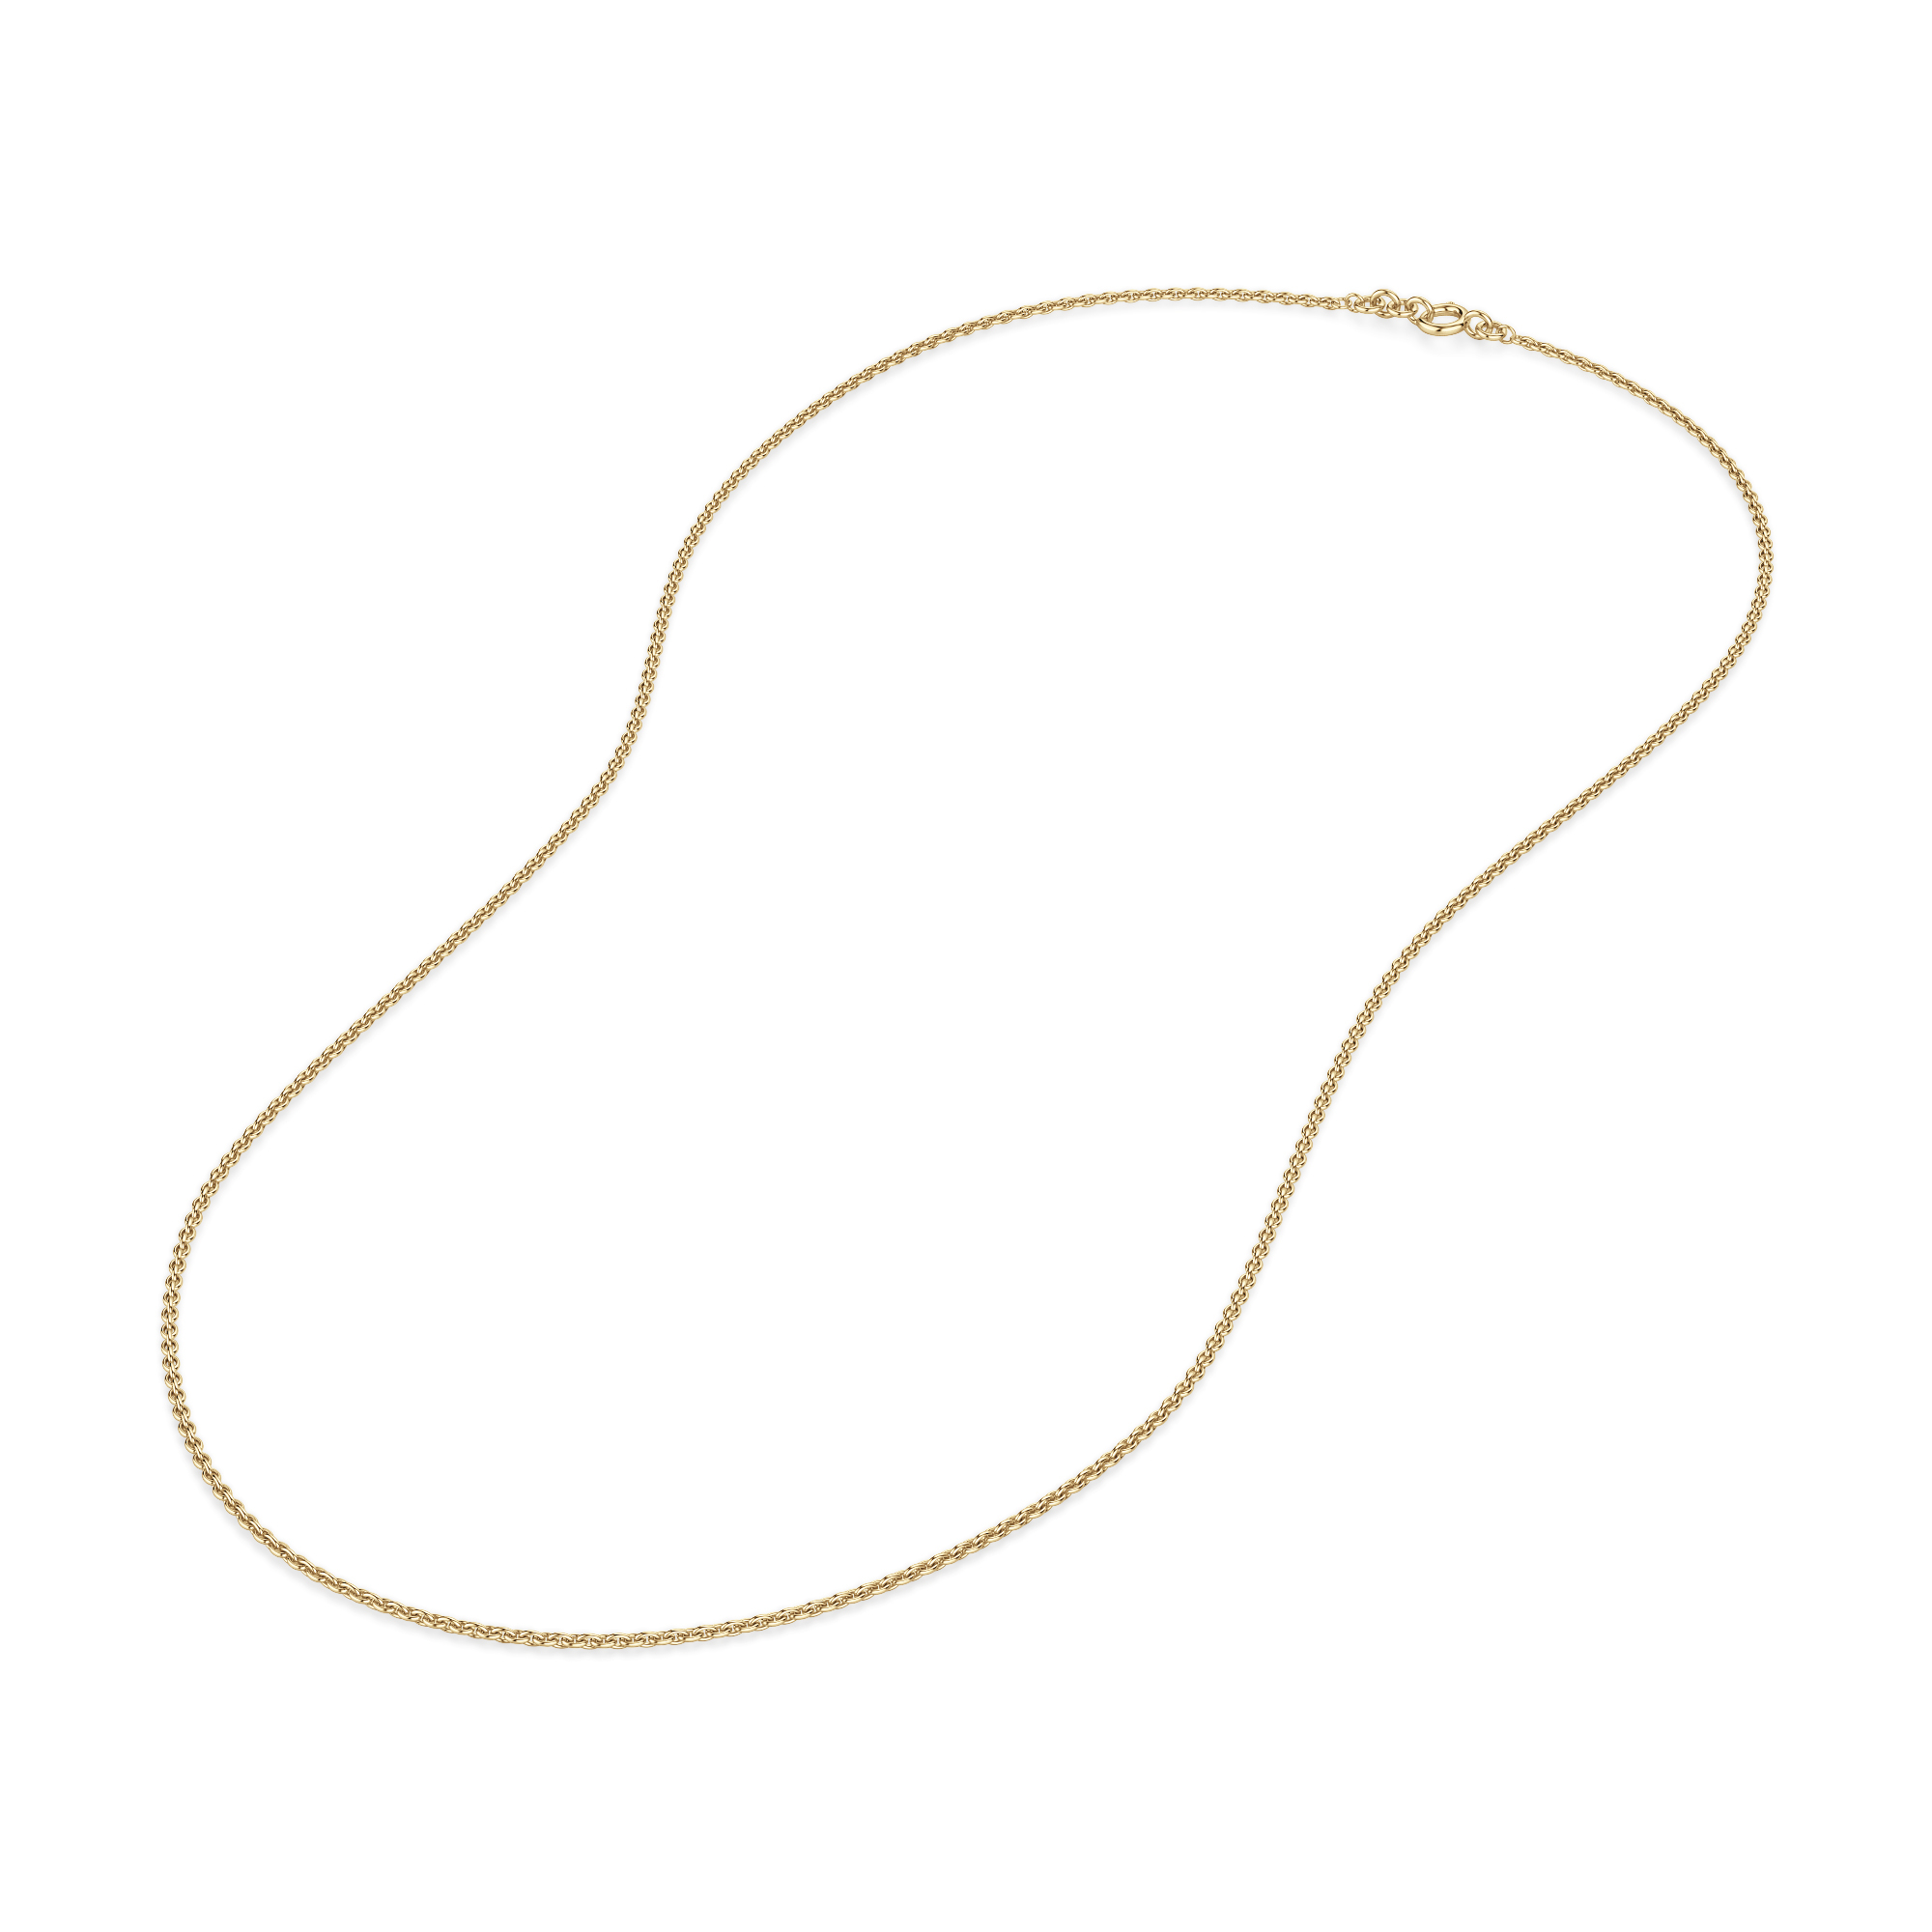 18k Solid Gold Clasp For Necklace or Bracelet,Extension Link Cable  Chain,2.0